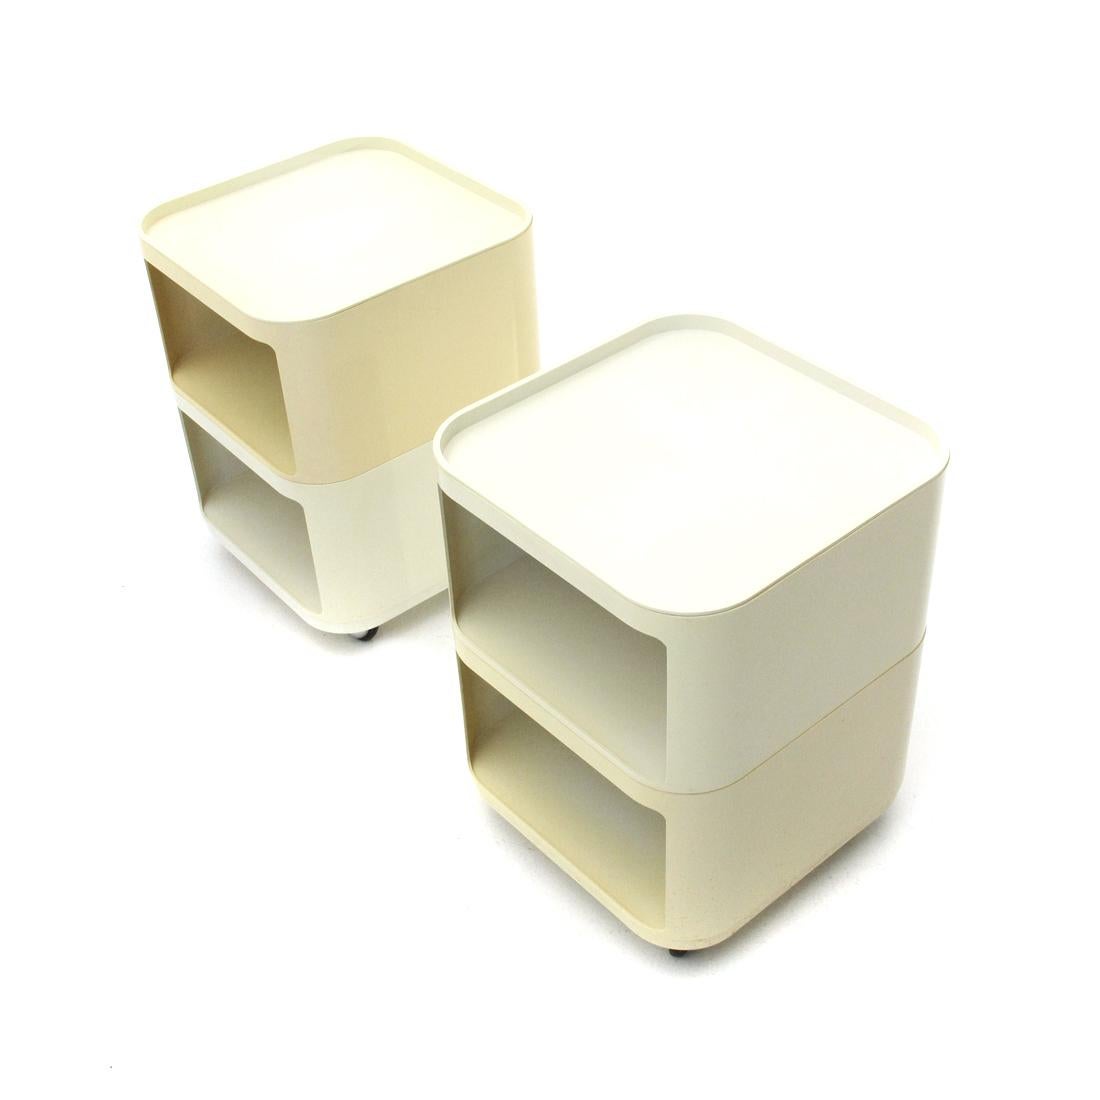 Italian Pair of Square Componibili Containers by Anna Castelli Ferrieri for Kartell 1970